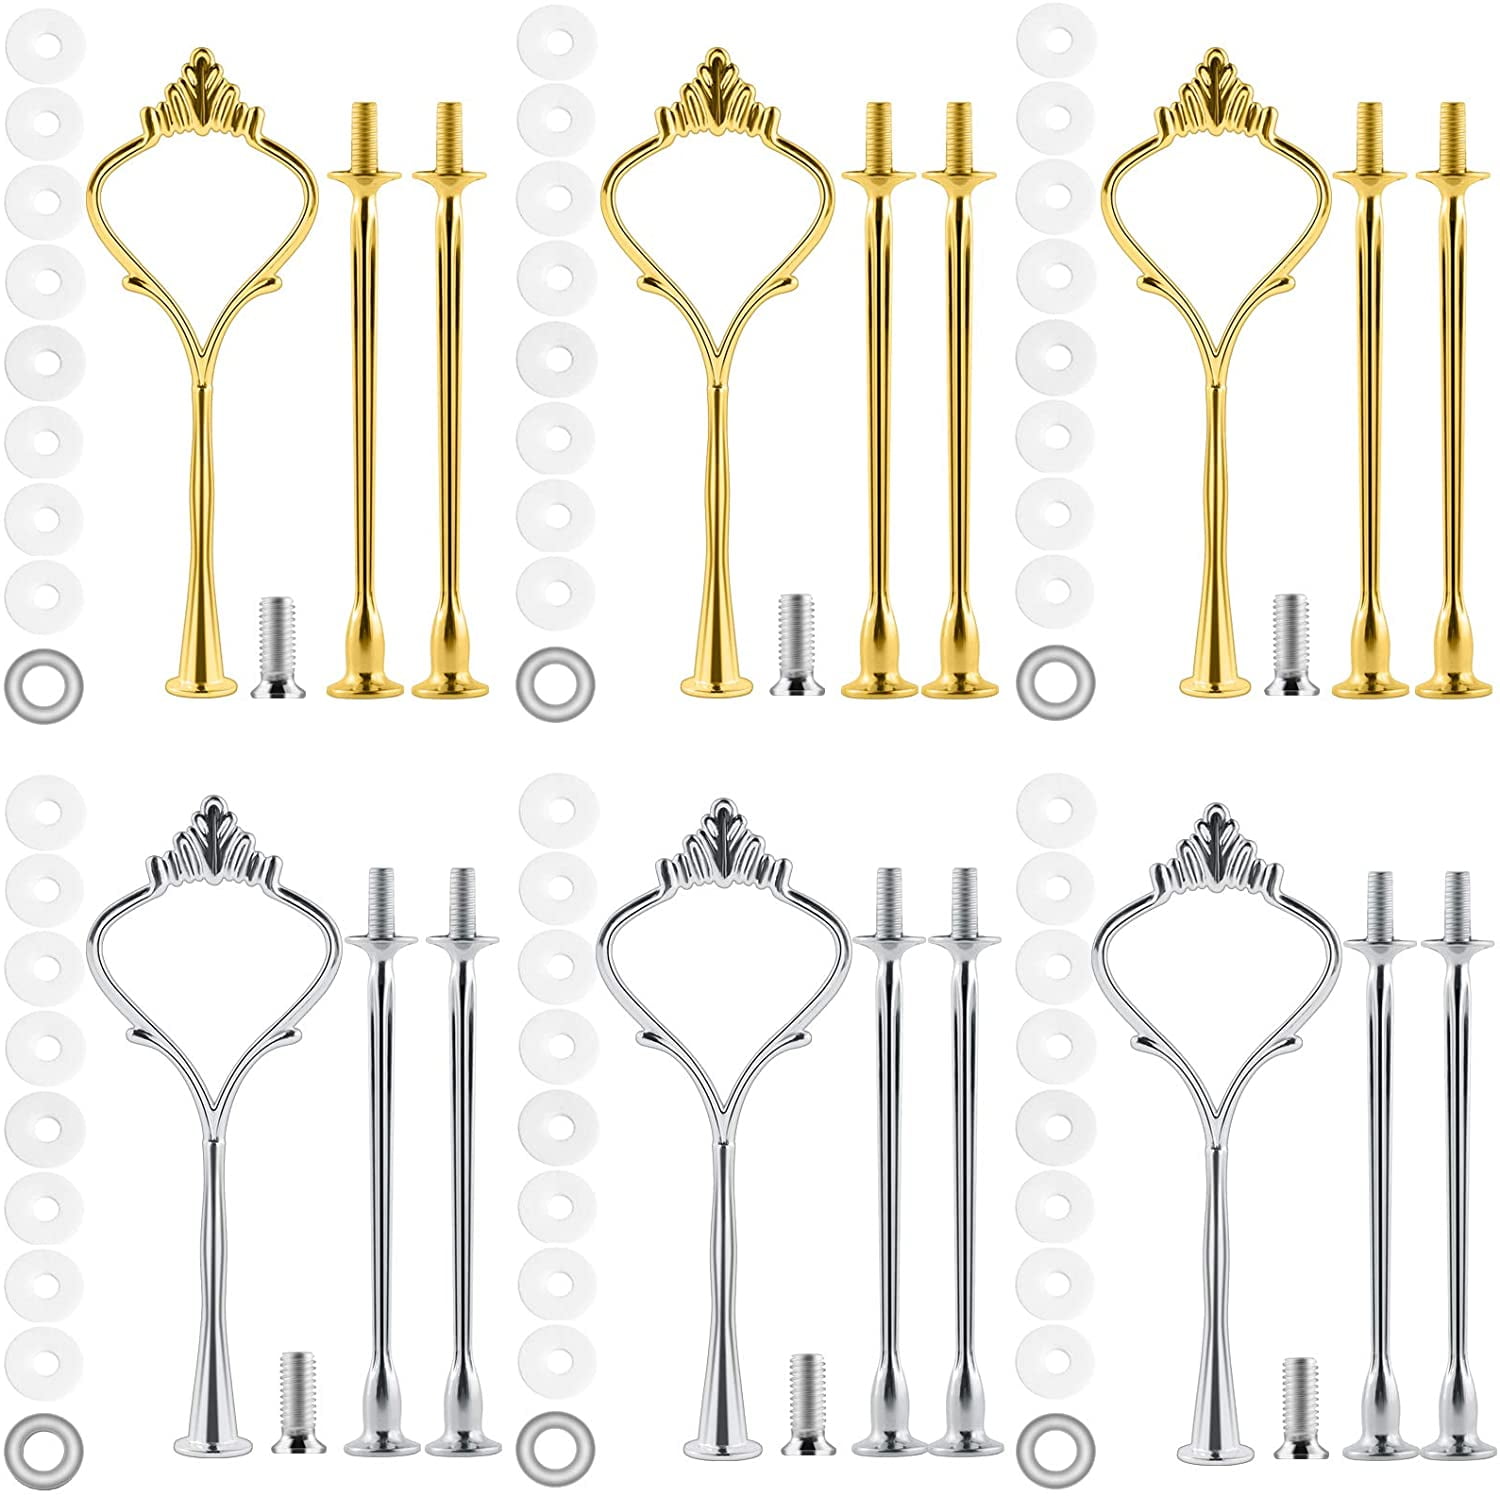 3 Silver 6 Sets Large Diameter 9 Sets Tiered Tray Hardware Fittings 3 Tiers Cake Stand Hardware with Strong Support Cake Tray Stand Fittings Hardware，3 Golden for Cake Stand Mold 3 Black